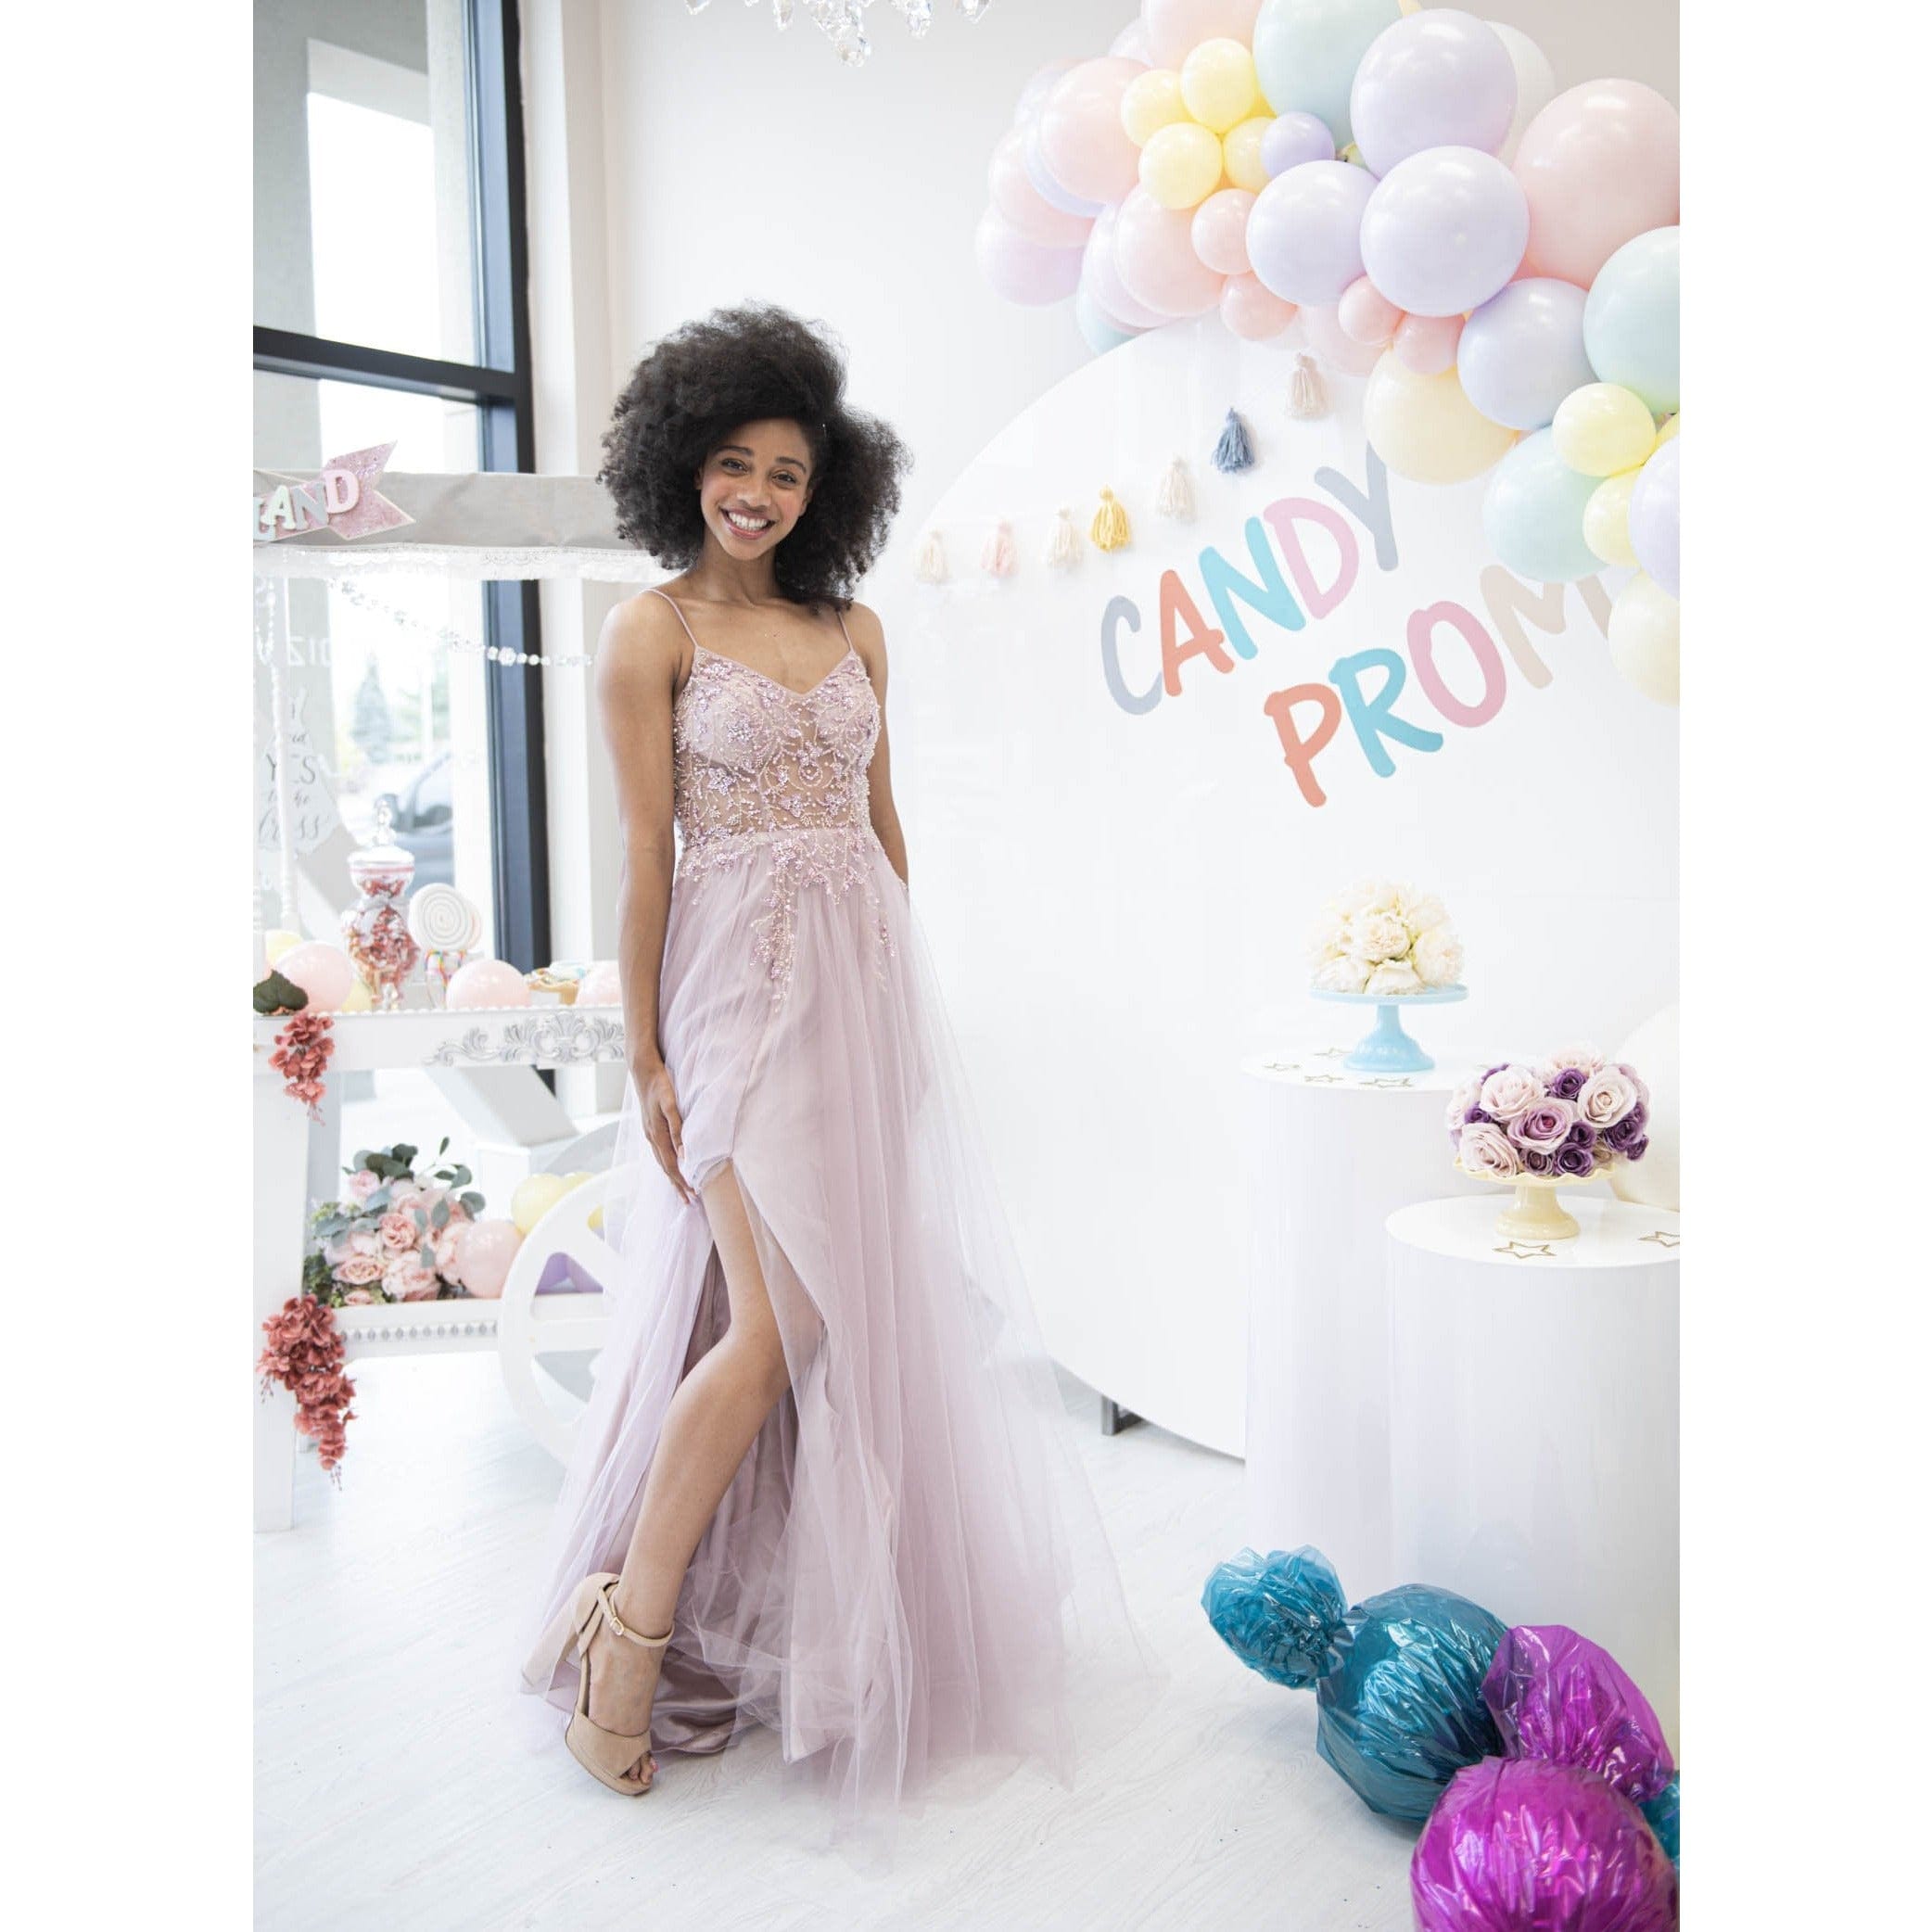 2023 Collection – CandyProm